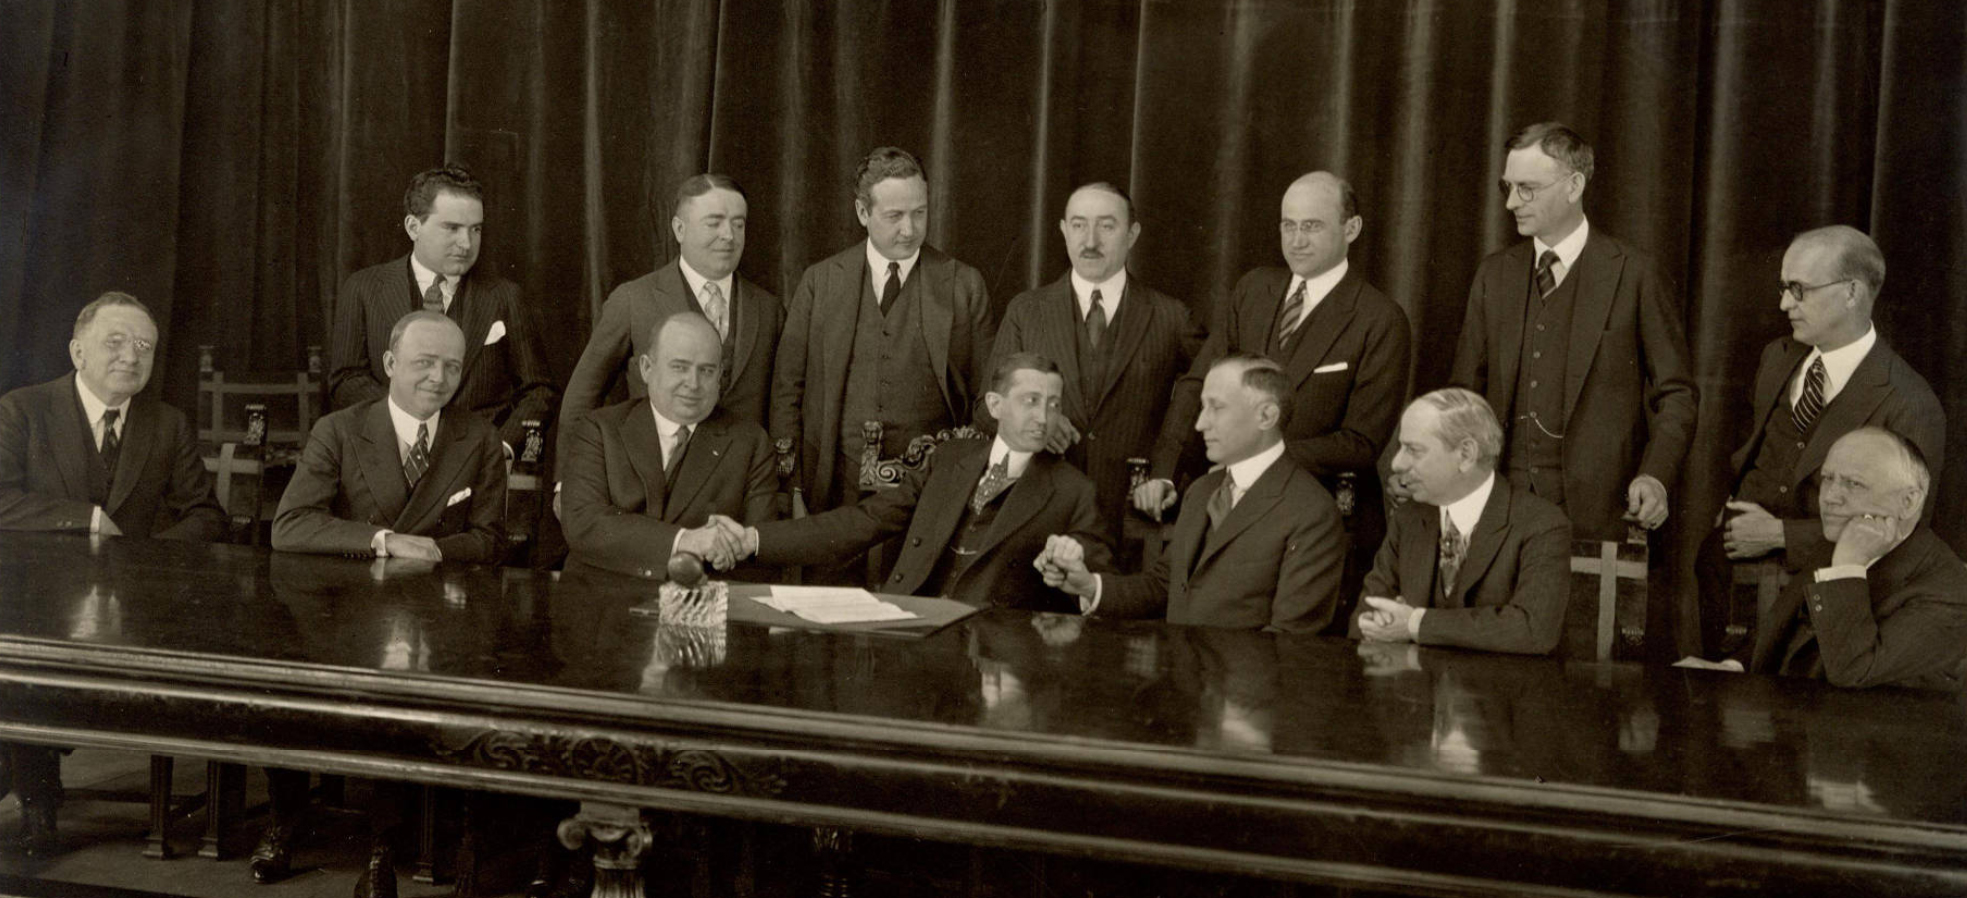 Photo of the first meeting of the Motion Picture Producers and Distributors of America (MPPDA) in 1922